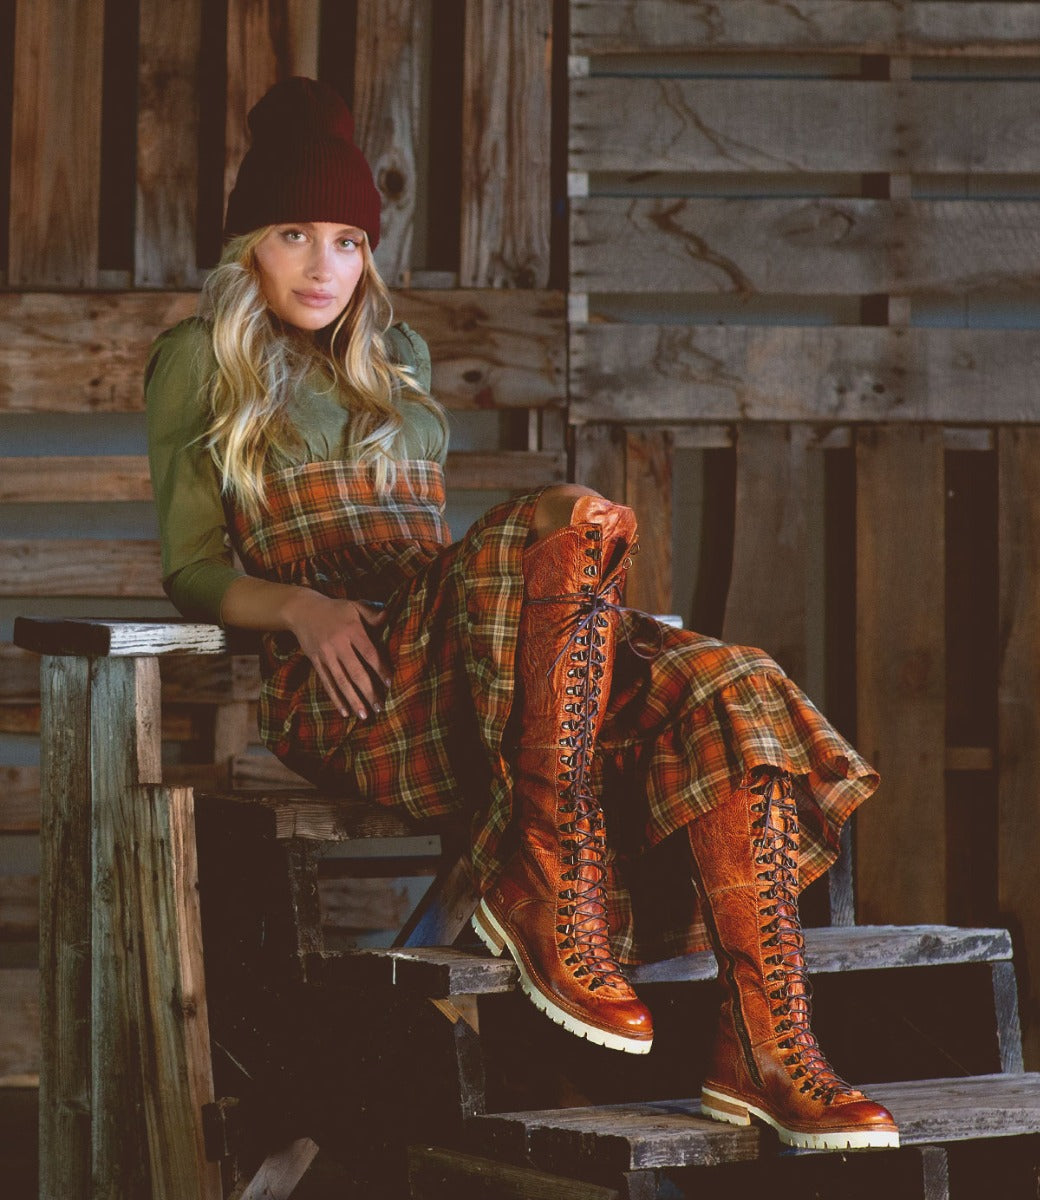 A woman wearing Lustrous boots and a hat sits on a wooden bench. Brand Name: Bed Stu.